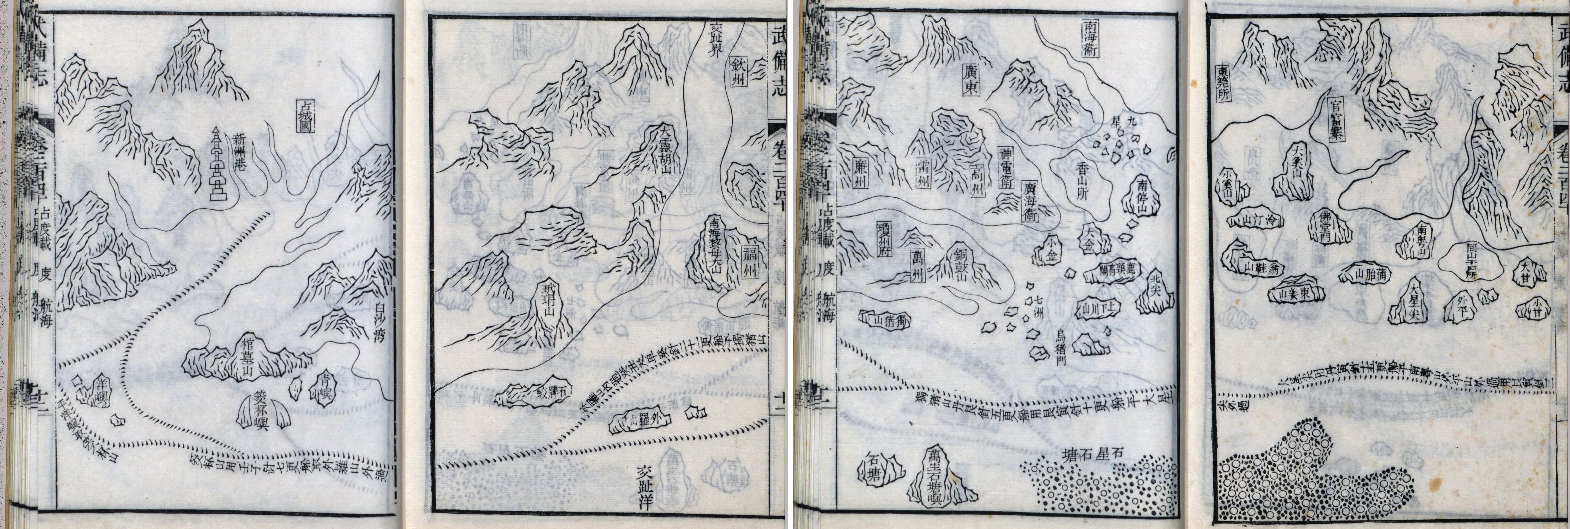 Wu bei zhi 1644 map of Admiral Zheng He's Voyage, page pairs 12-11 (9-10 of 20)